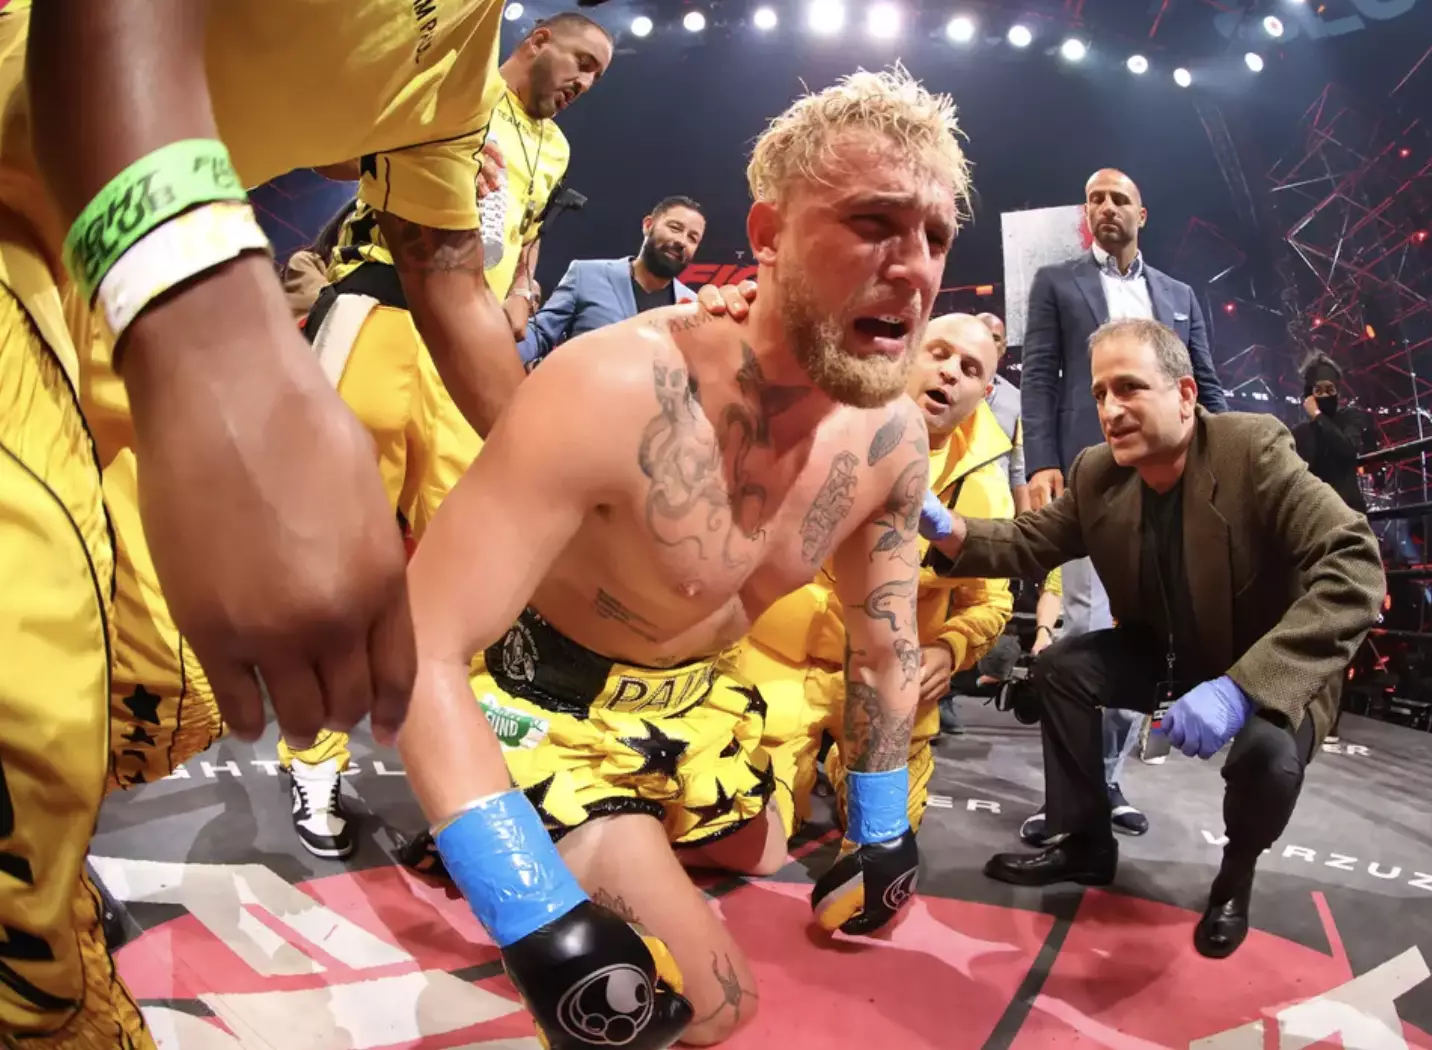 Jake Paul emphatically knocked out former MMA star Ben Askren in his last fight